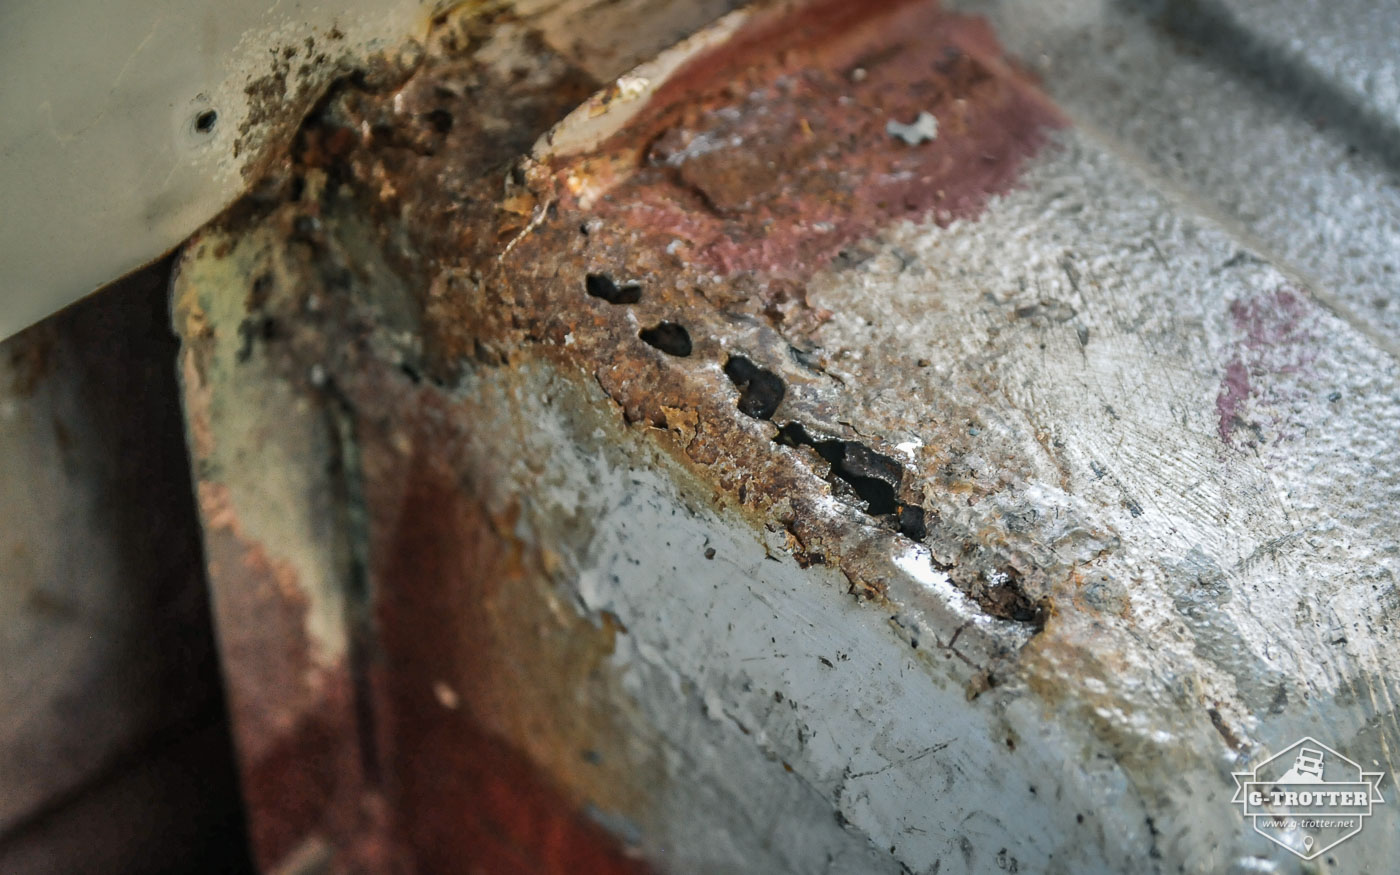 The wheel archs had been affected from corrosion as well. 